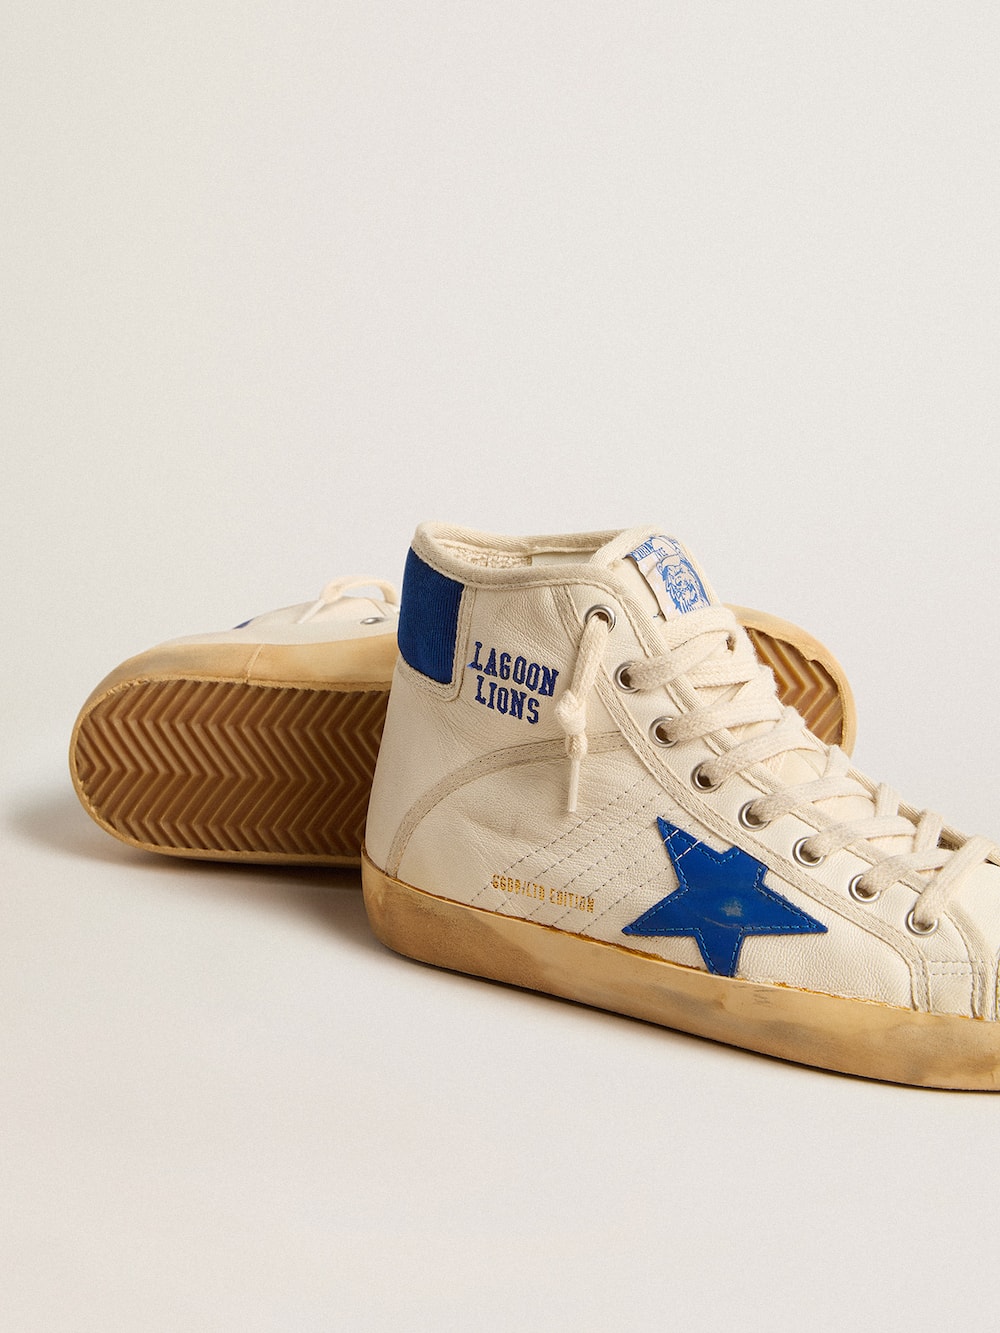 Golden Goose - Women’s Francy Penstar LAB in nappa leather with blue star and nylon heel tab in 